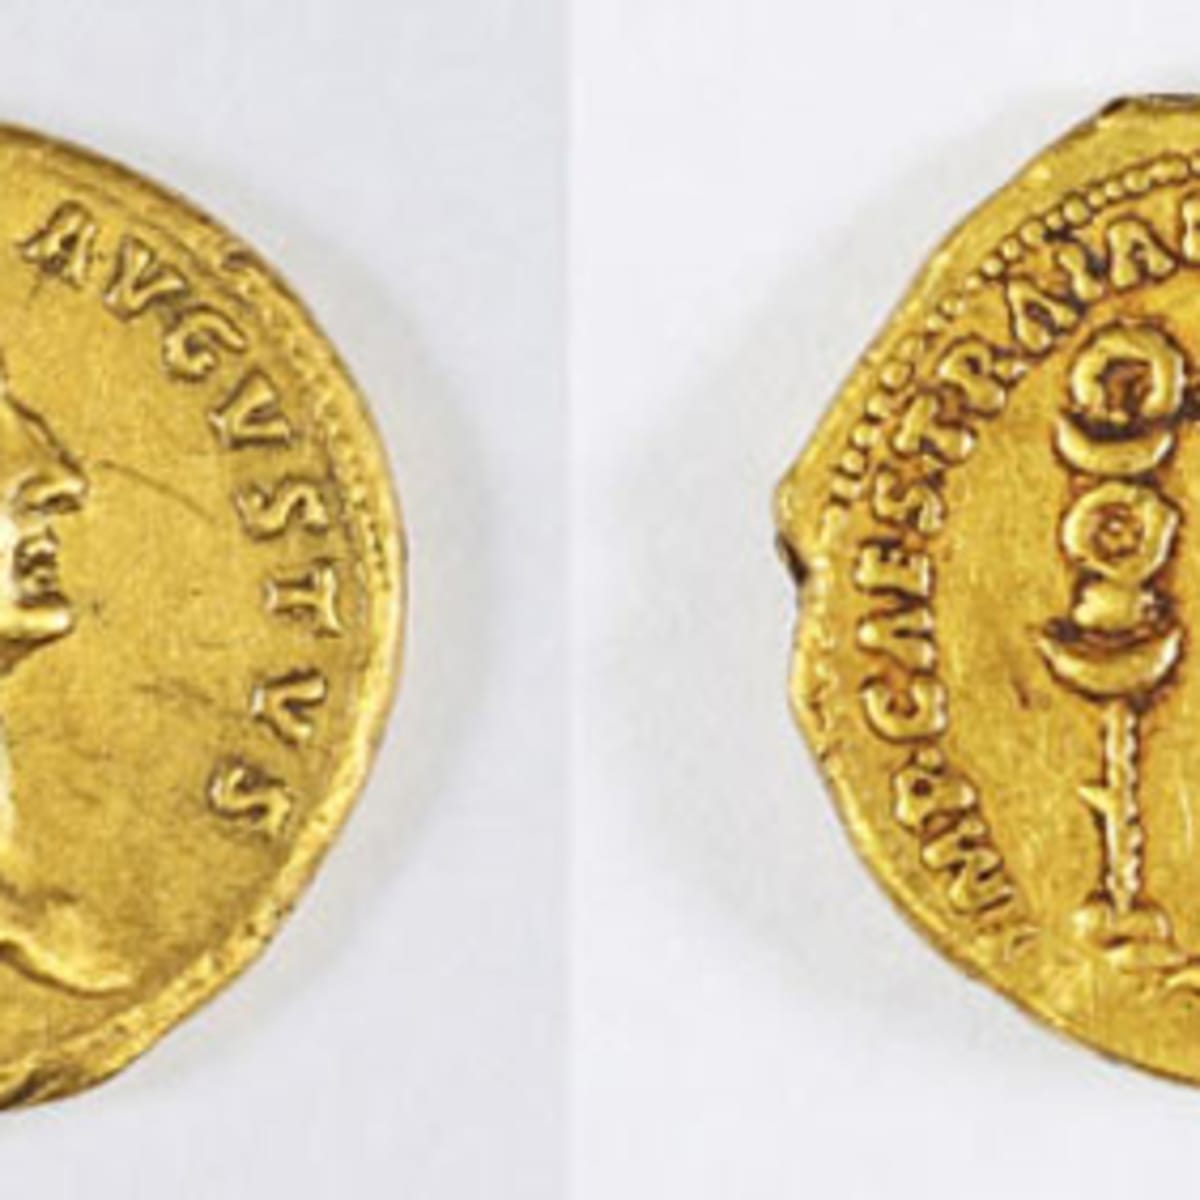 Rare gold ancient found in Israel - Numismatic News